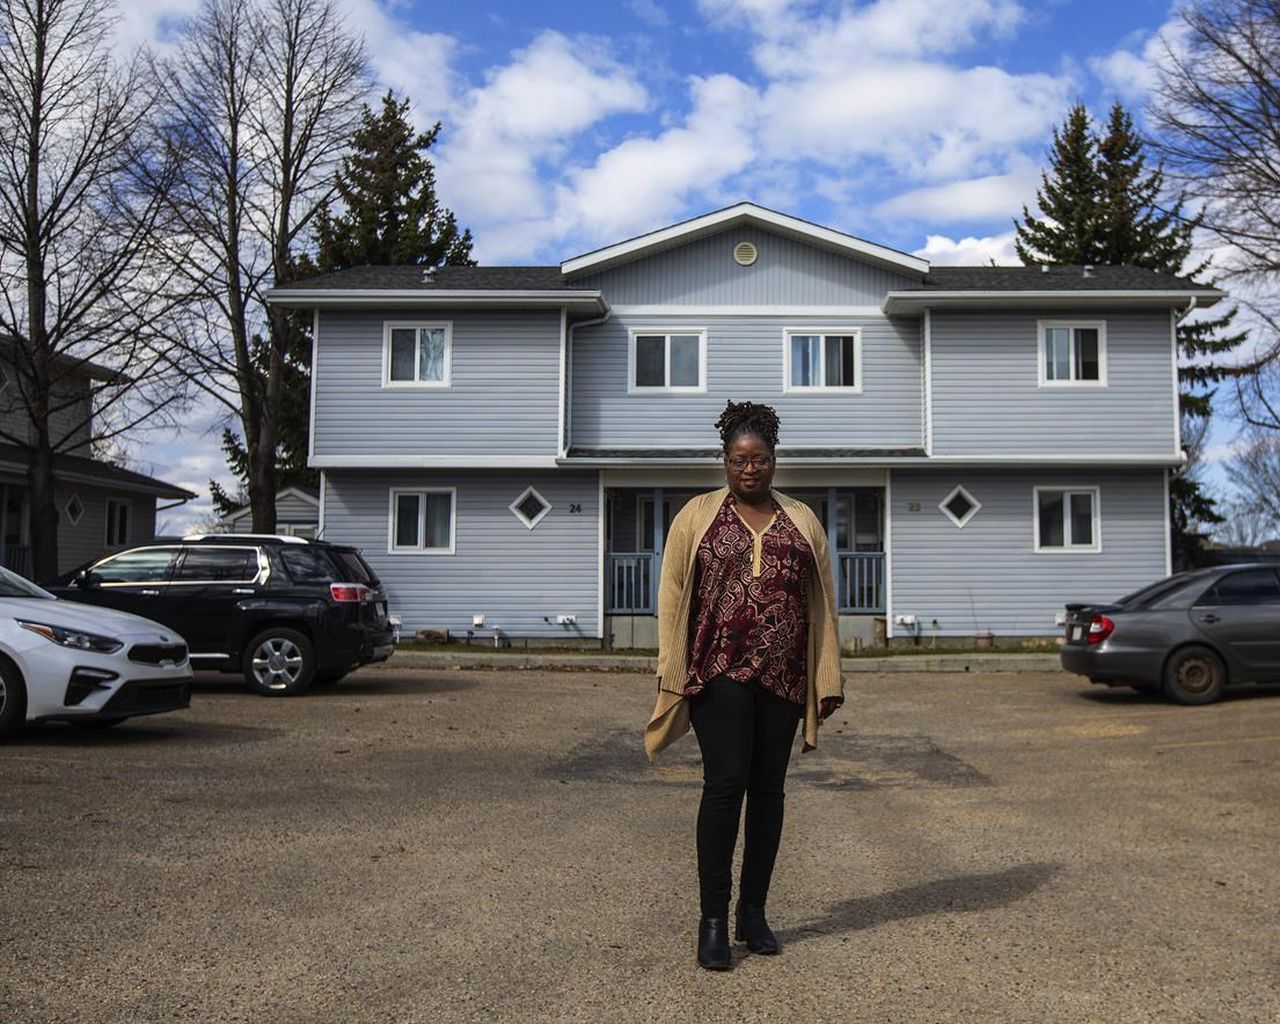 CO-OP HOUSING COULD HELP SOLVE CANADA’S AFFORDABILITY CRISIS, ADVOCATES SAY